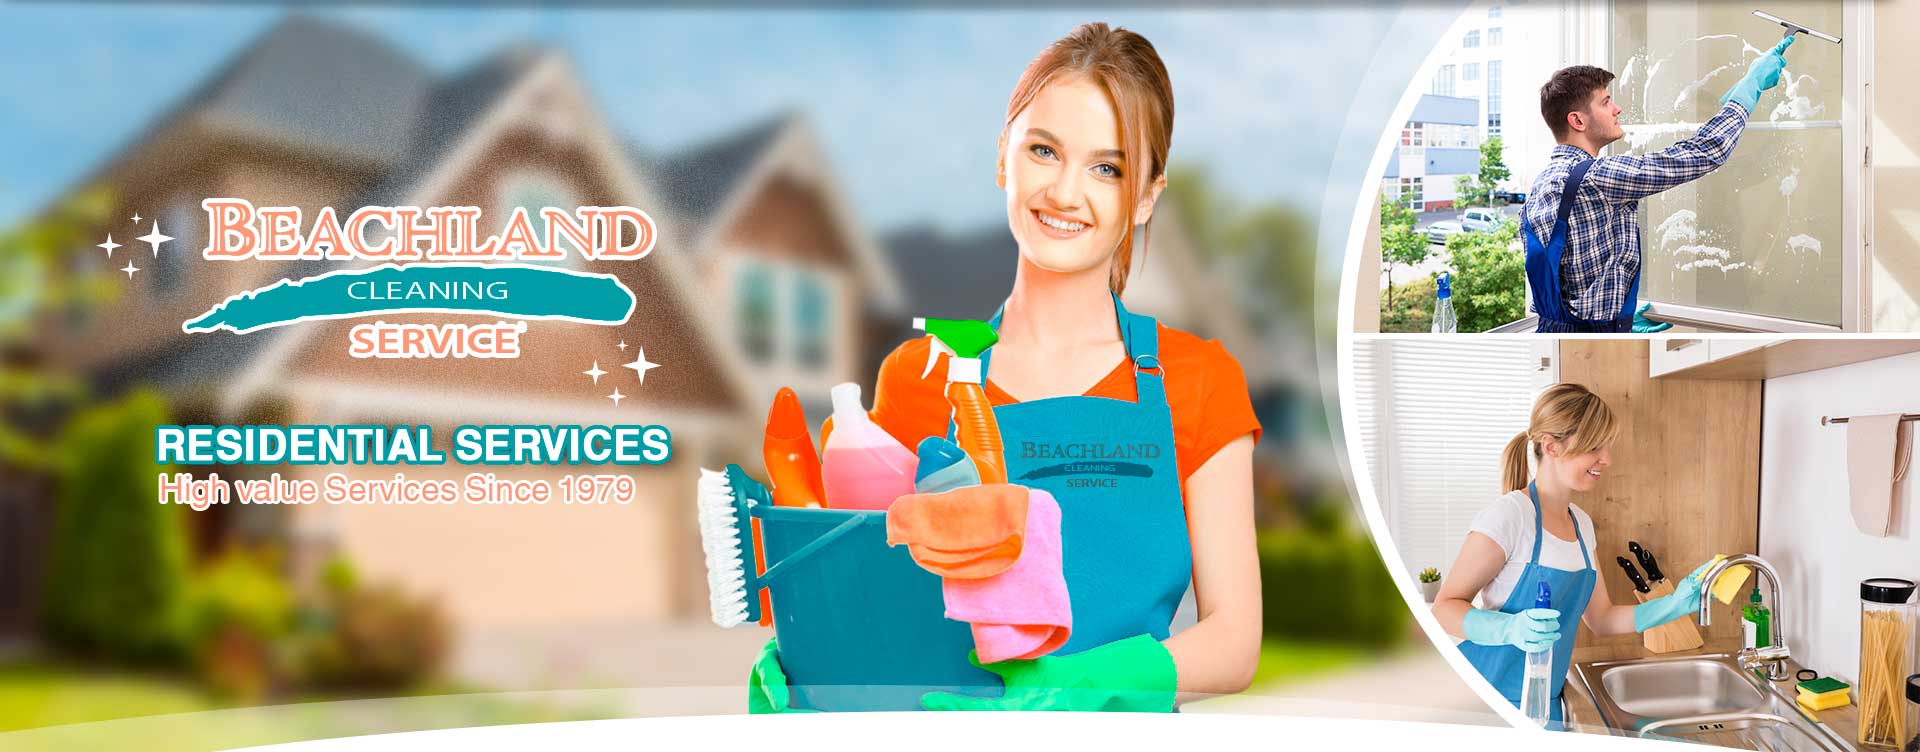 Janitorial Services in Palm Beach